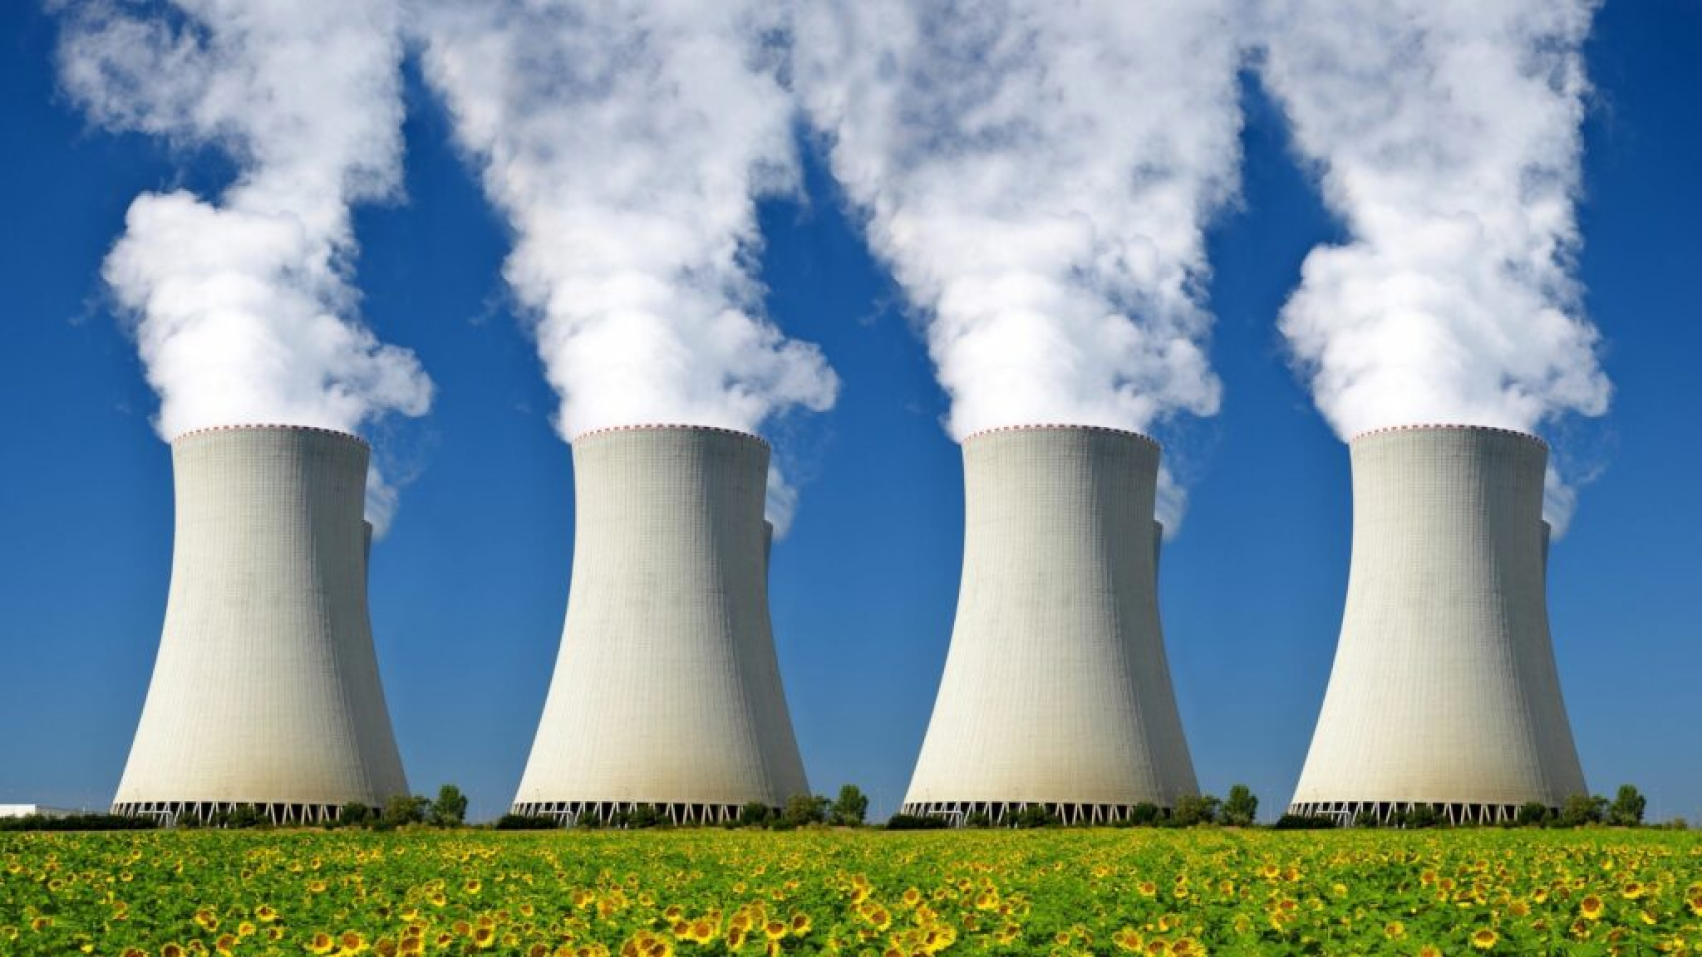 Nuclear power plants are actually cool